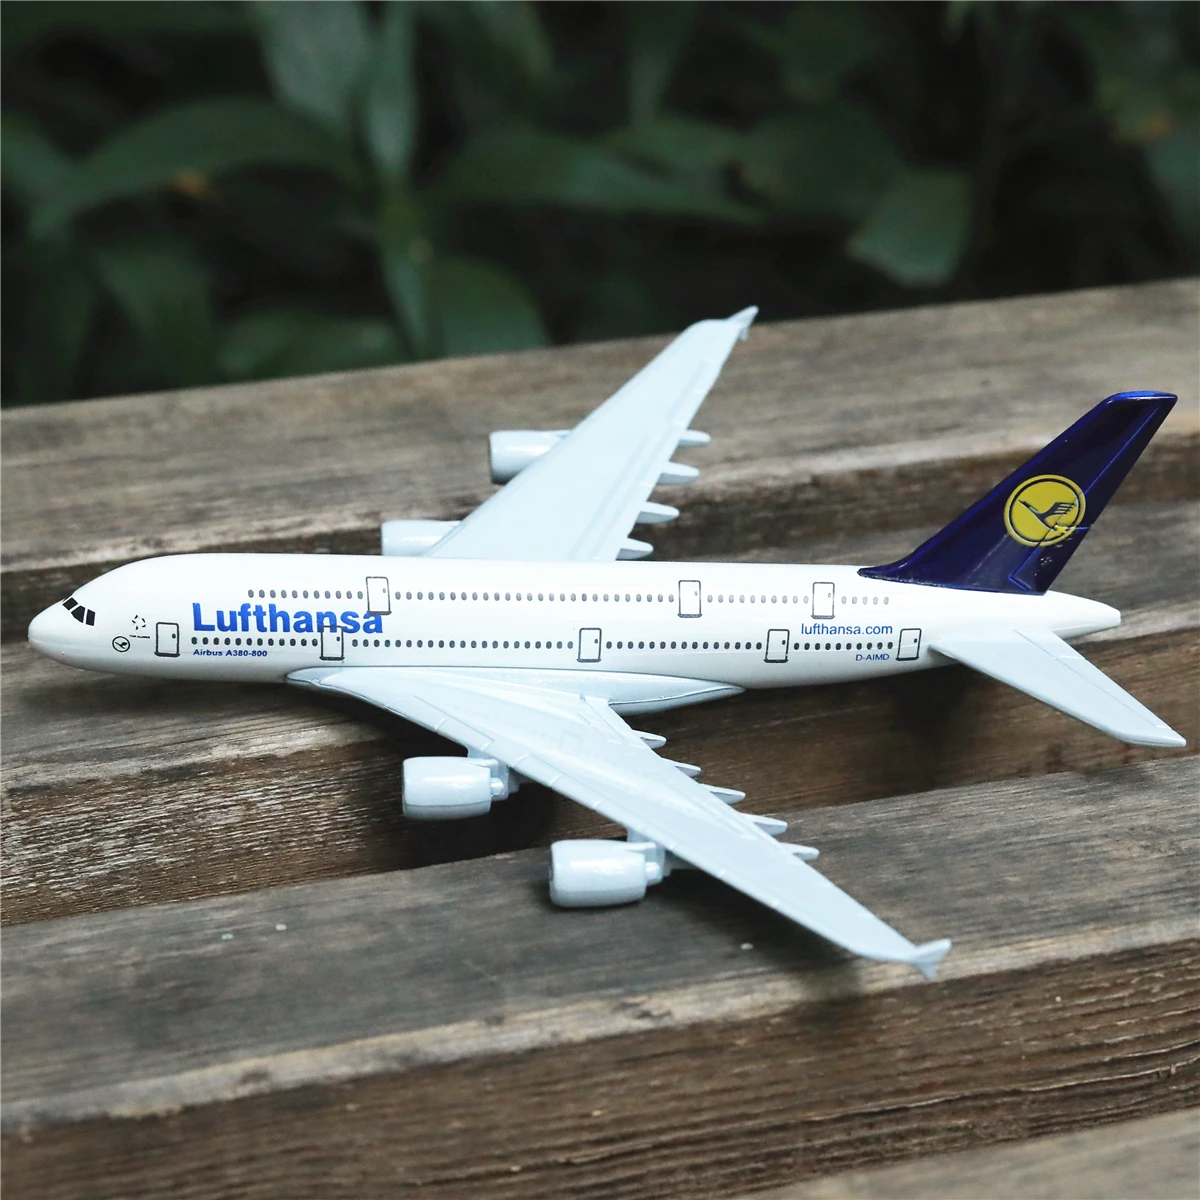 

Scale 1:400 Metal Aircraft Replica 15cm Germany Lufthansa Airlines Airbus Airplane Model Aviation Collectible Diecast Miniature